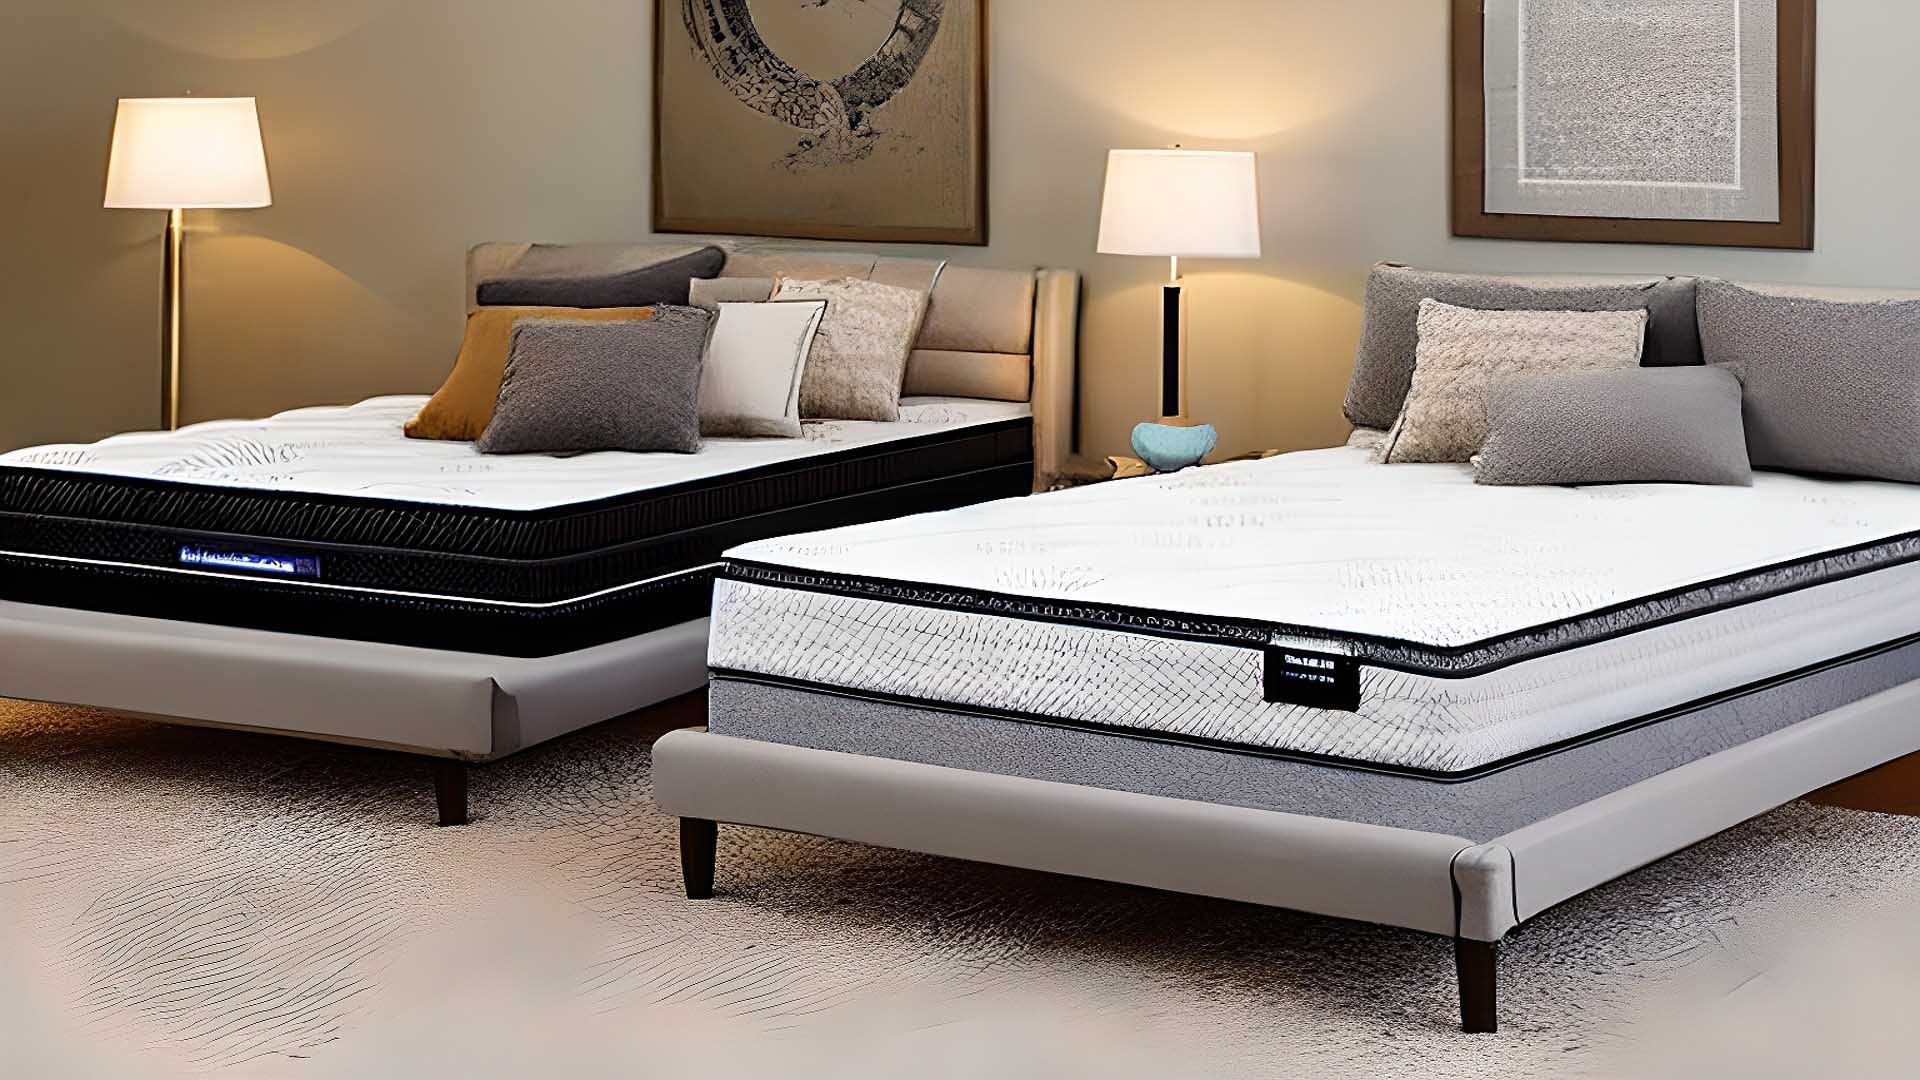 Mattress Sales & Deals in Rochester, NY